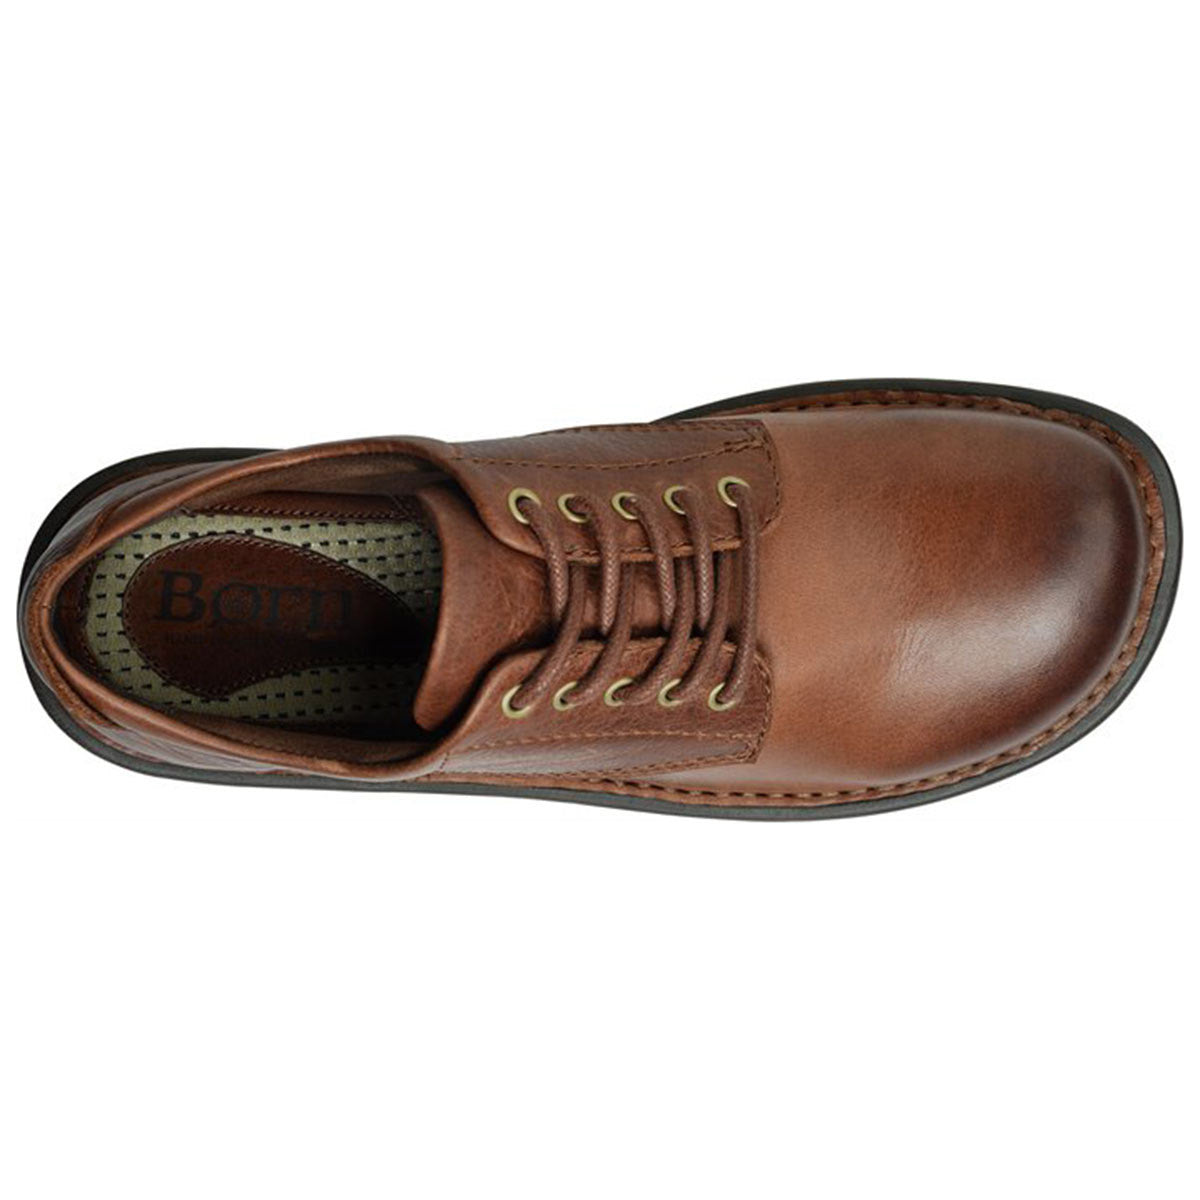 Top view of a brown full grain leather lace-up shoe with visible stitching and a patterned interior labeled &quot;BORN HUTCHINS III DARK TAN - MENS&quot; by Born.